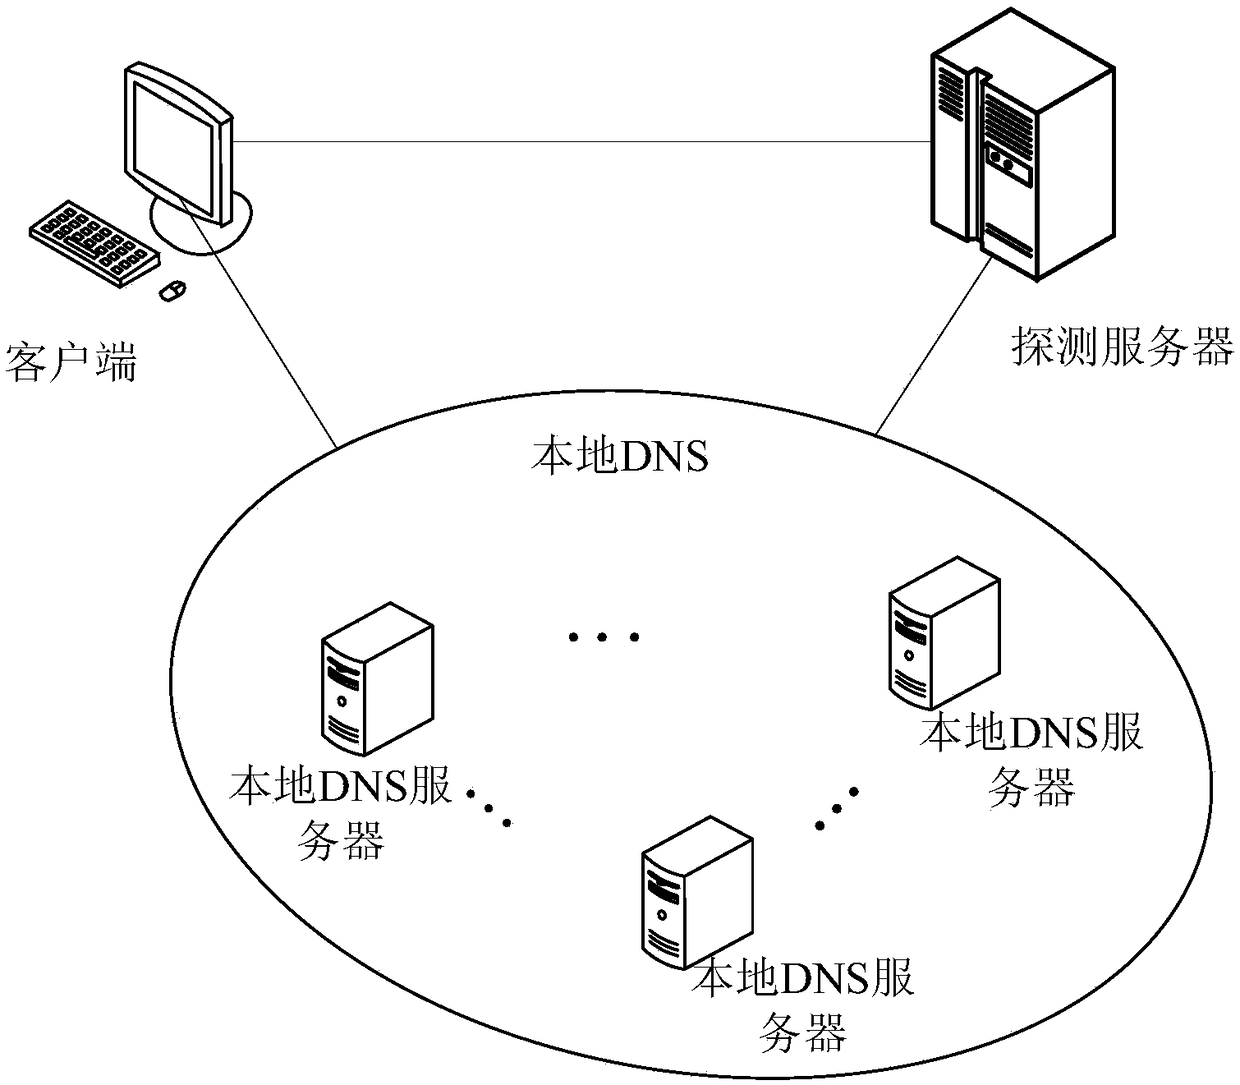 DNS (Domain Name System) export server ip address detection methods and system